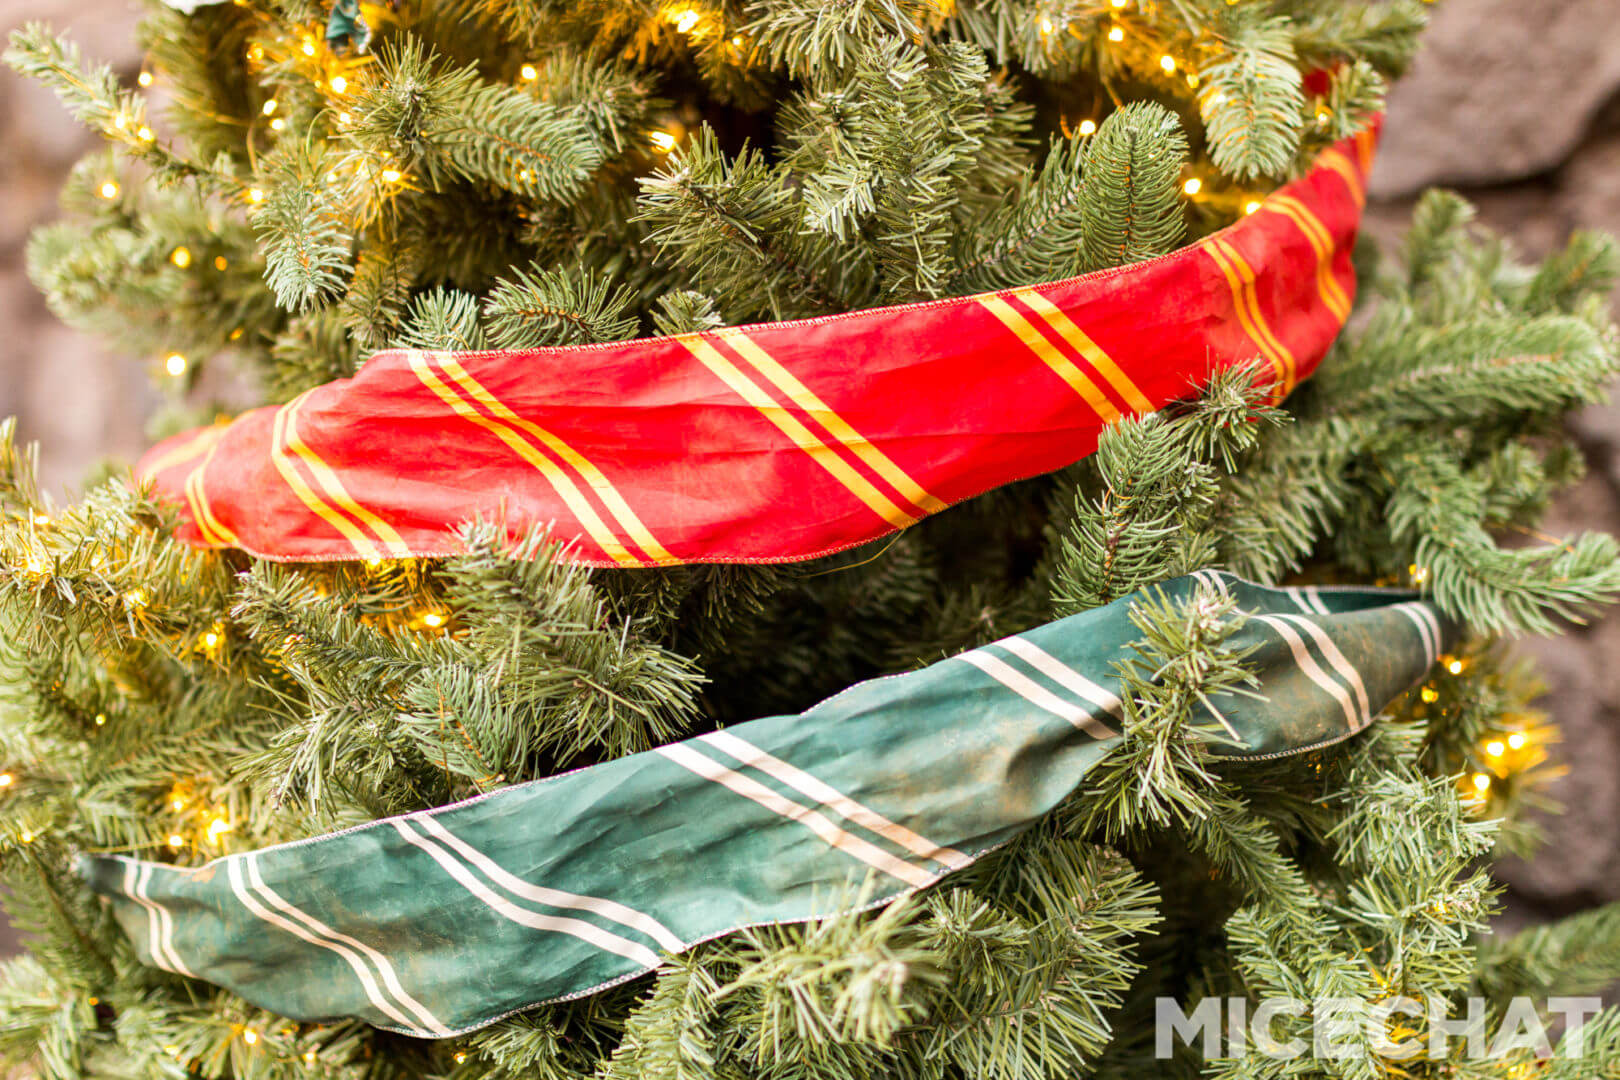 universal-studios-hollywood-wizarding-world-of-harry-potter-tree-with-ribbon  - MiceChat